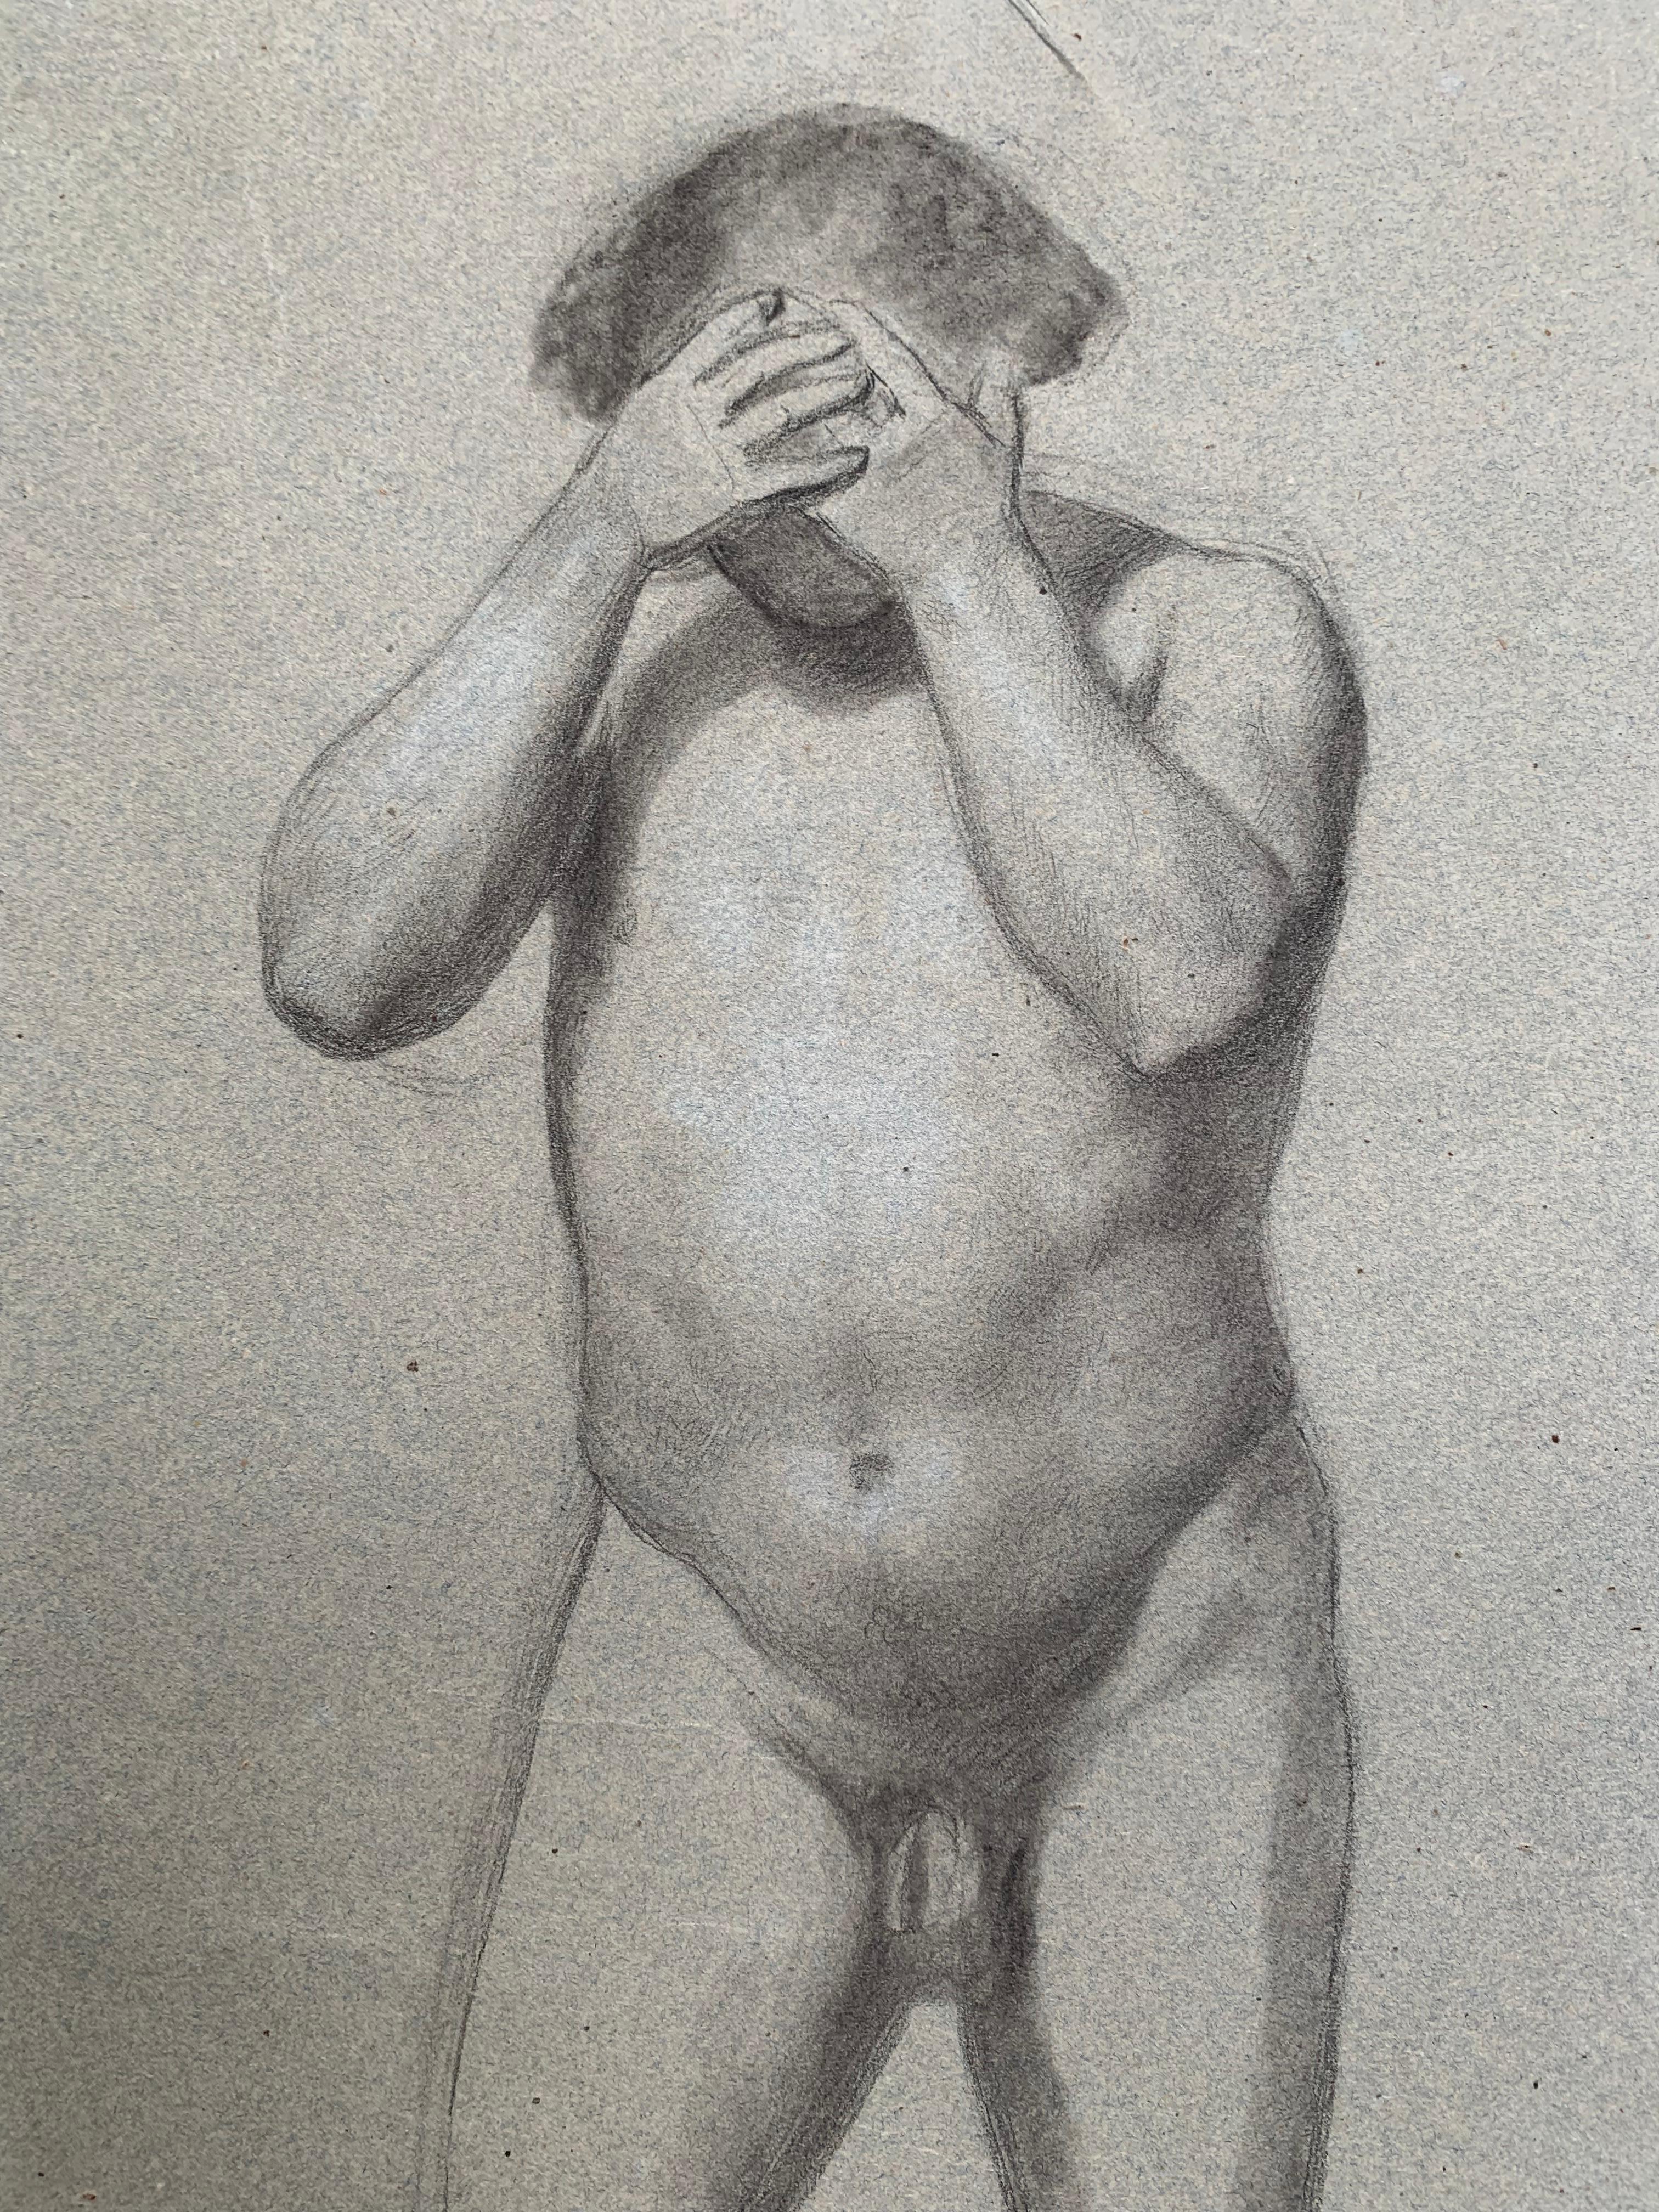 Preparatory anatomical study for the figure of a man with hands on his face. For Sale 2